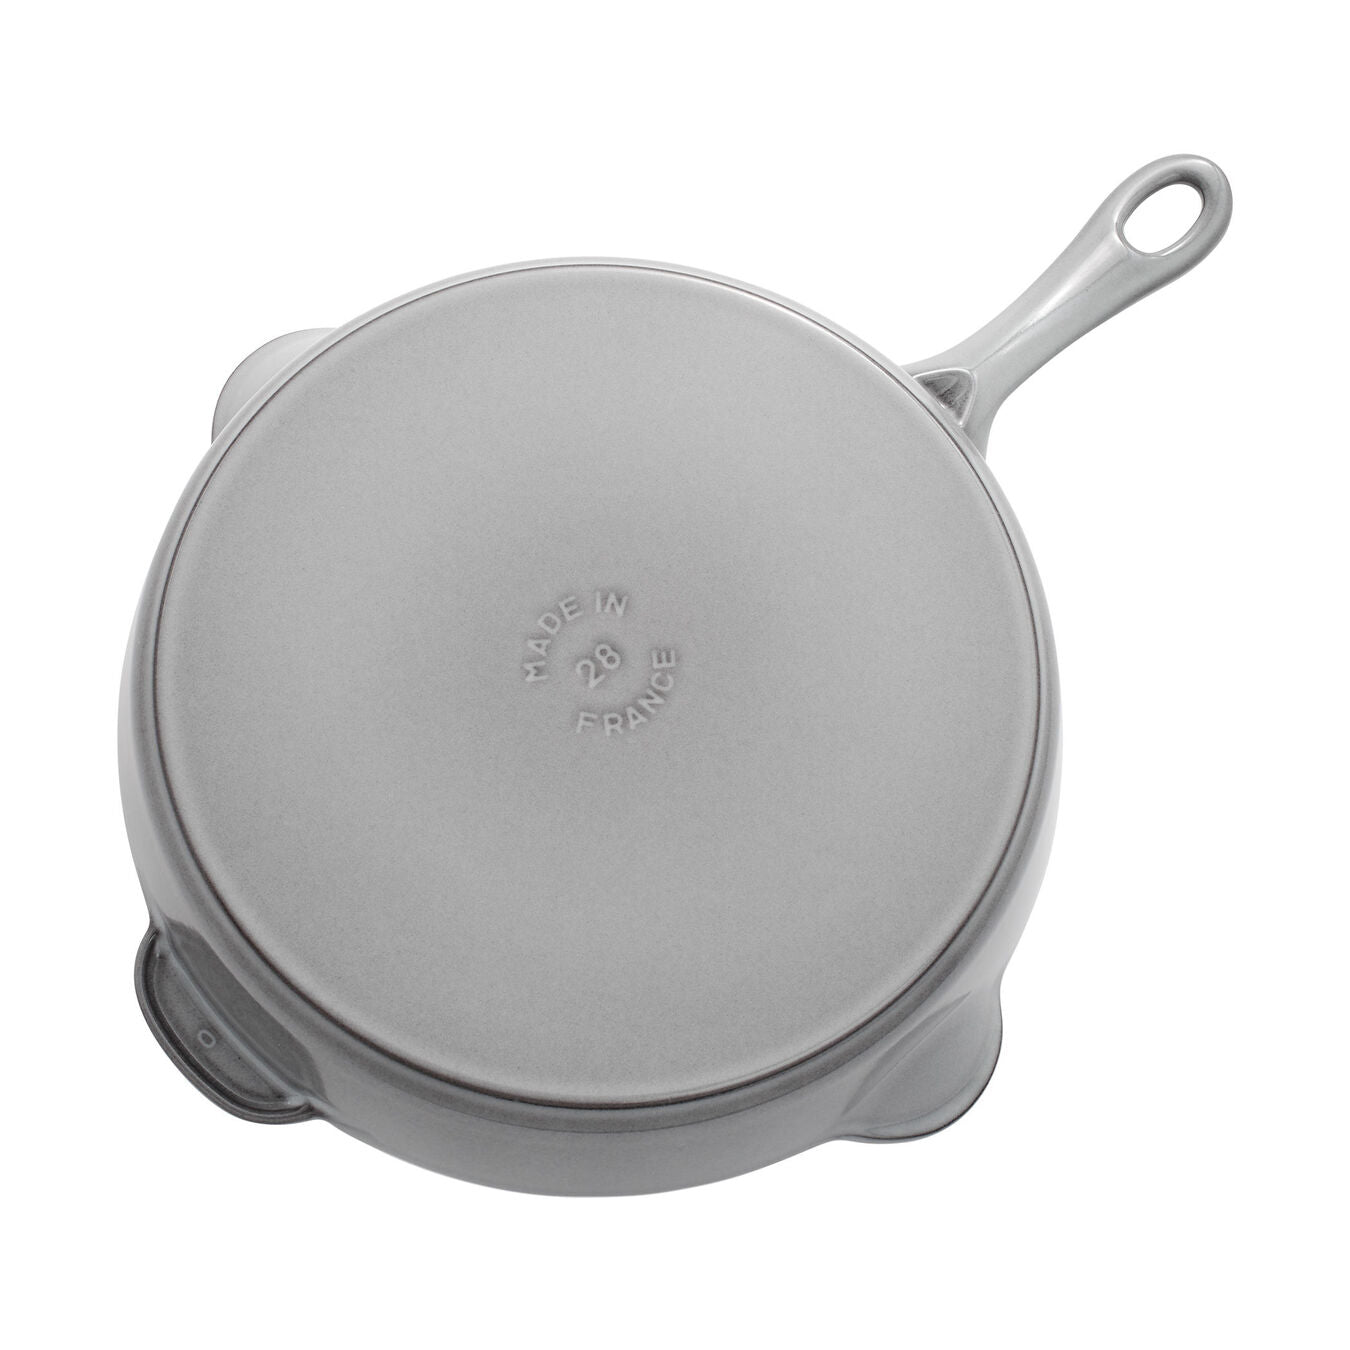 Staub Cast Iron Pan with Lid 10-inch, 2.9 Quart Serves 2-3, Fry Pan, Cast  Iron Skillet, Wok, Made in France, Cherry